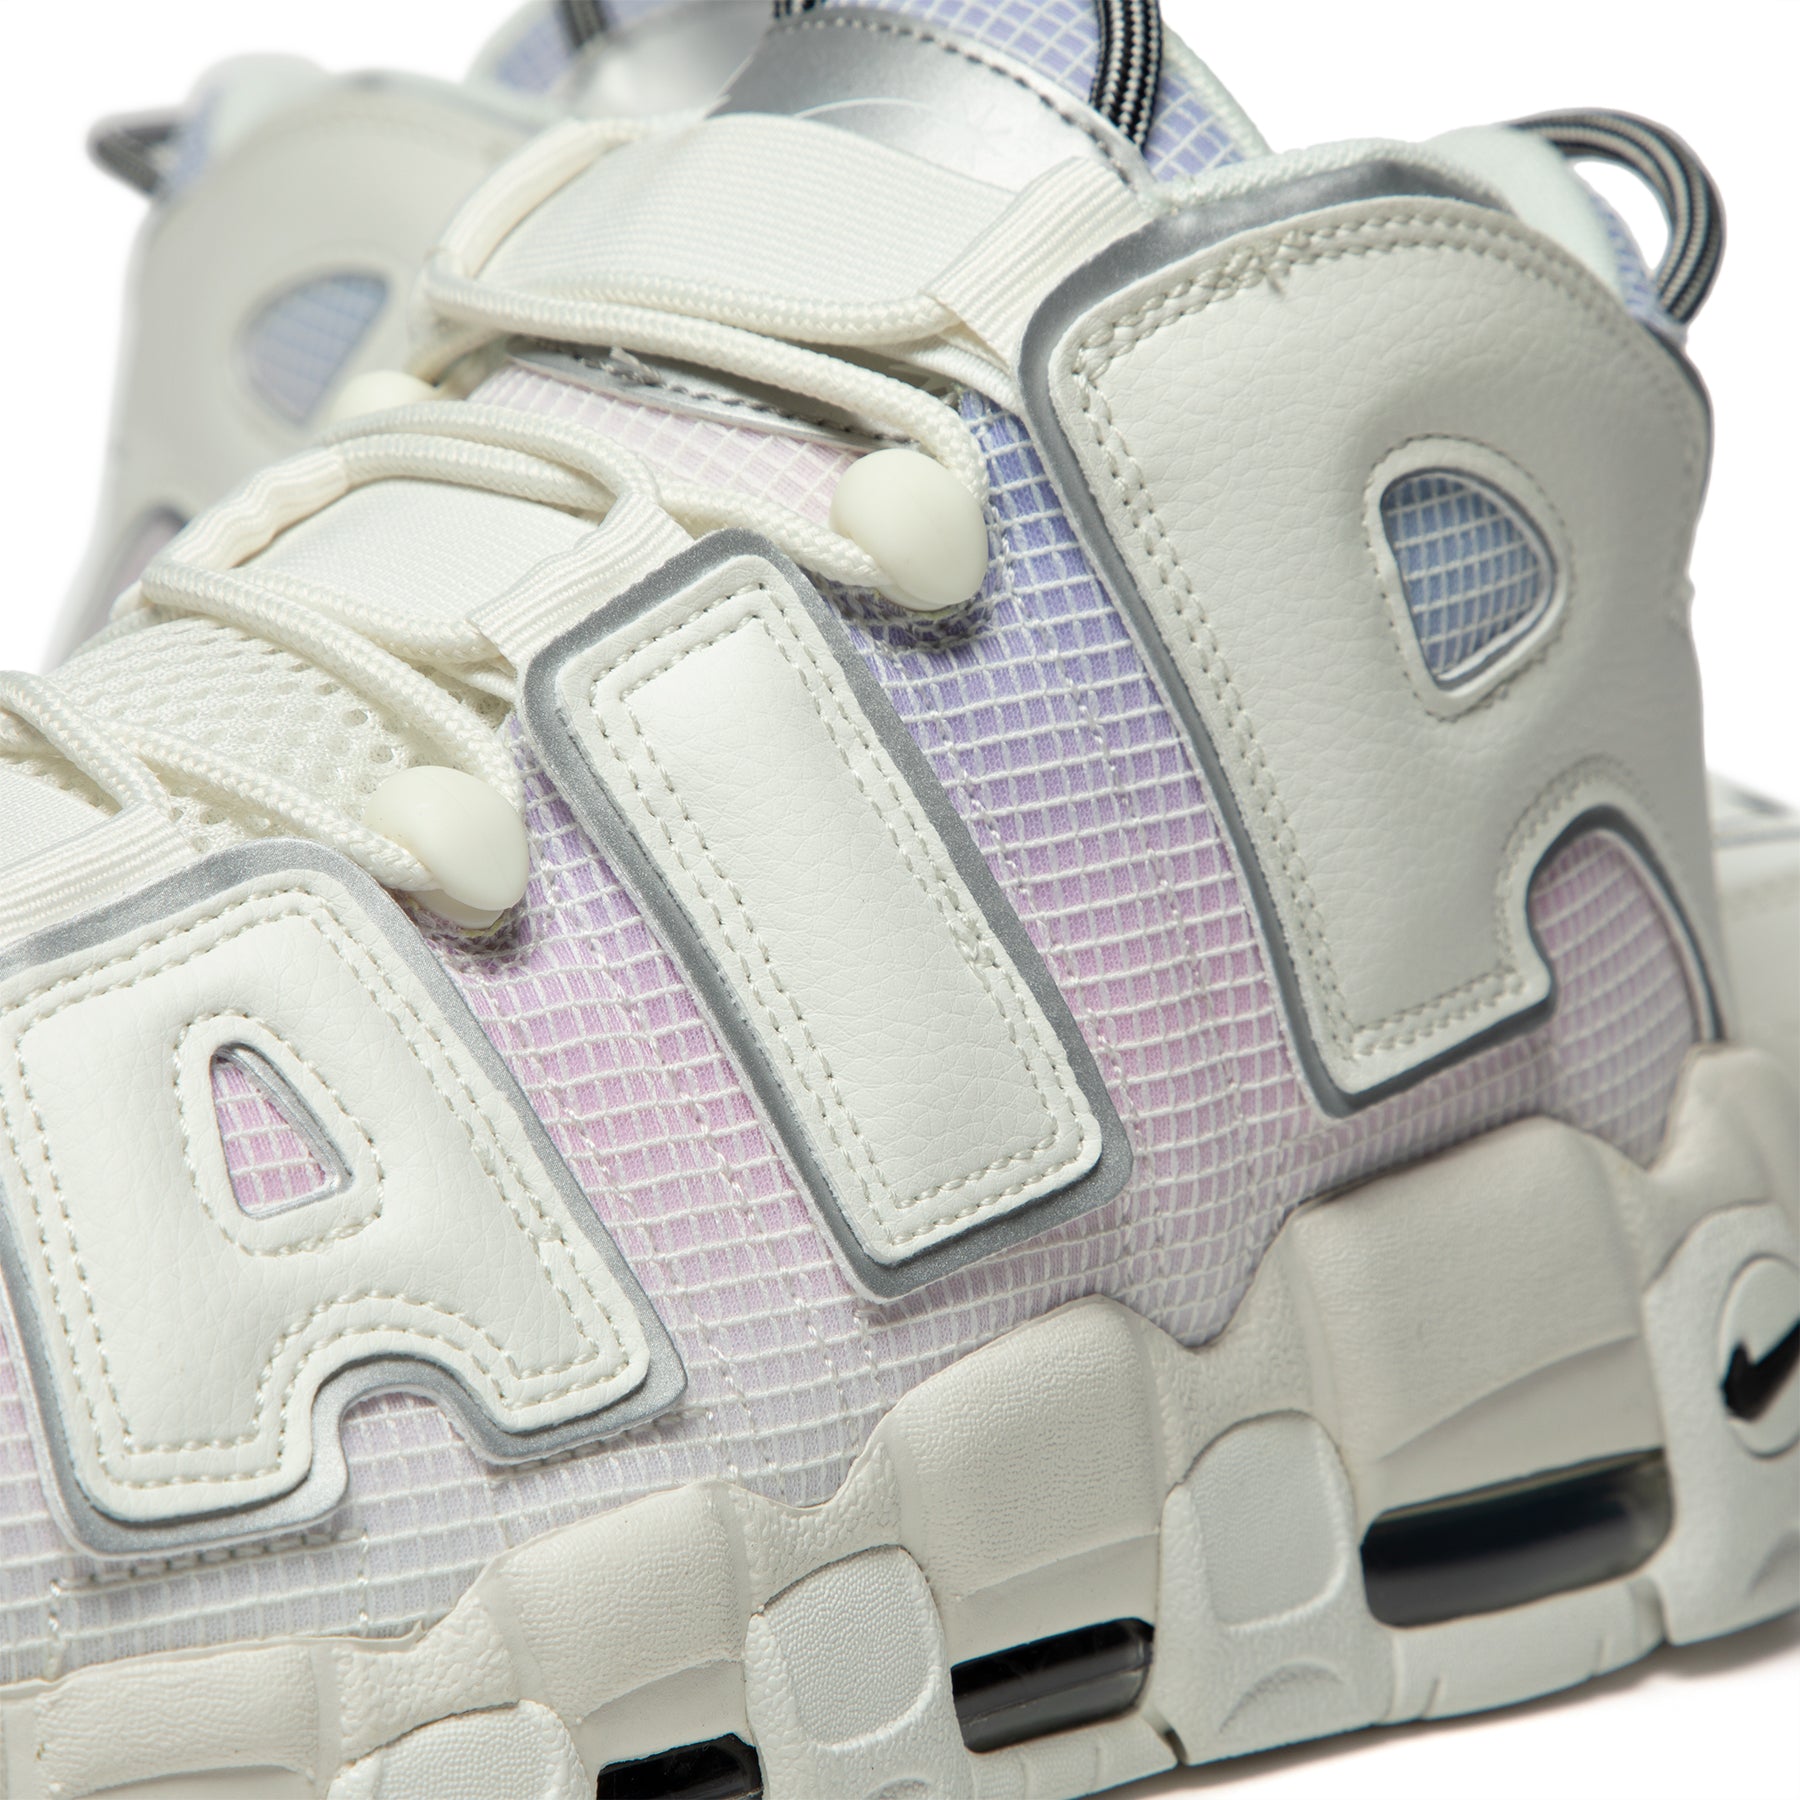 Nike Air More Uptempo White Pink Purple DR9612-100